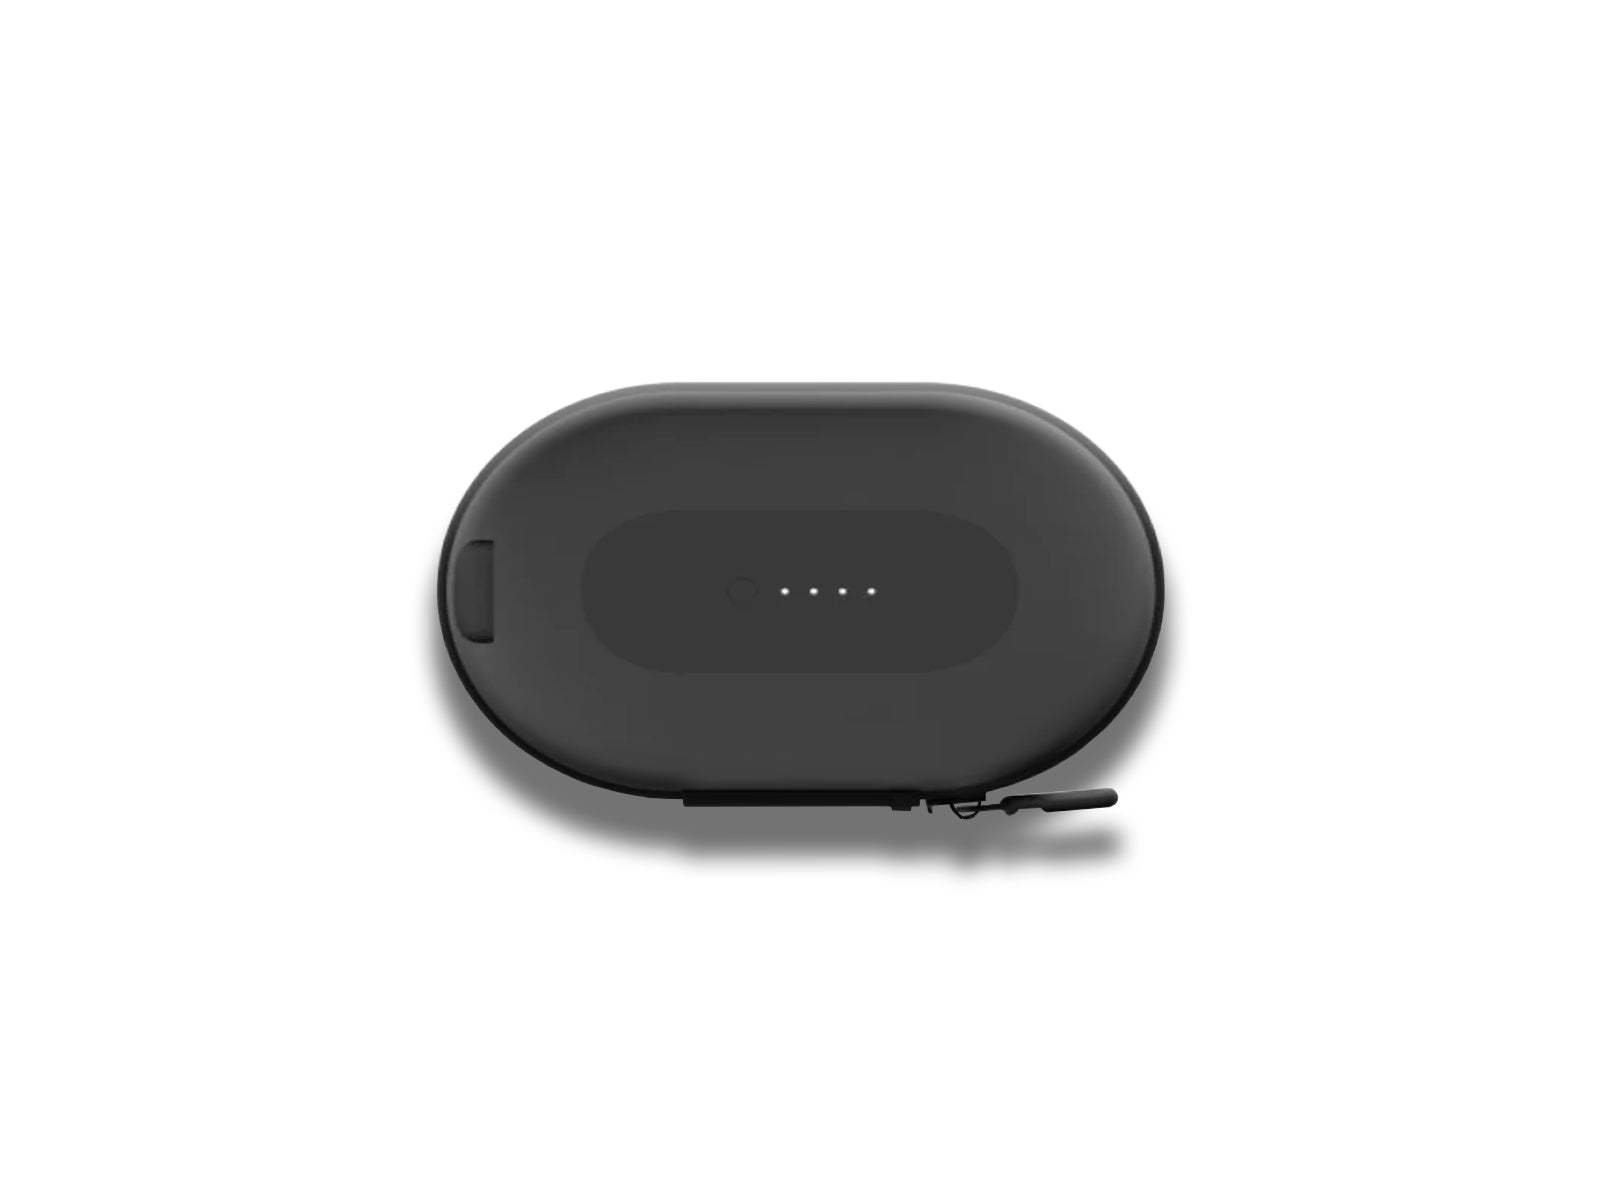 Mophie Portable Power Capsule Charger Bottom View